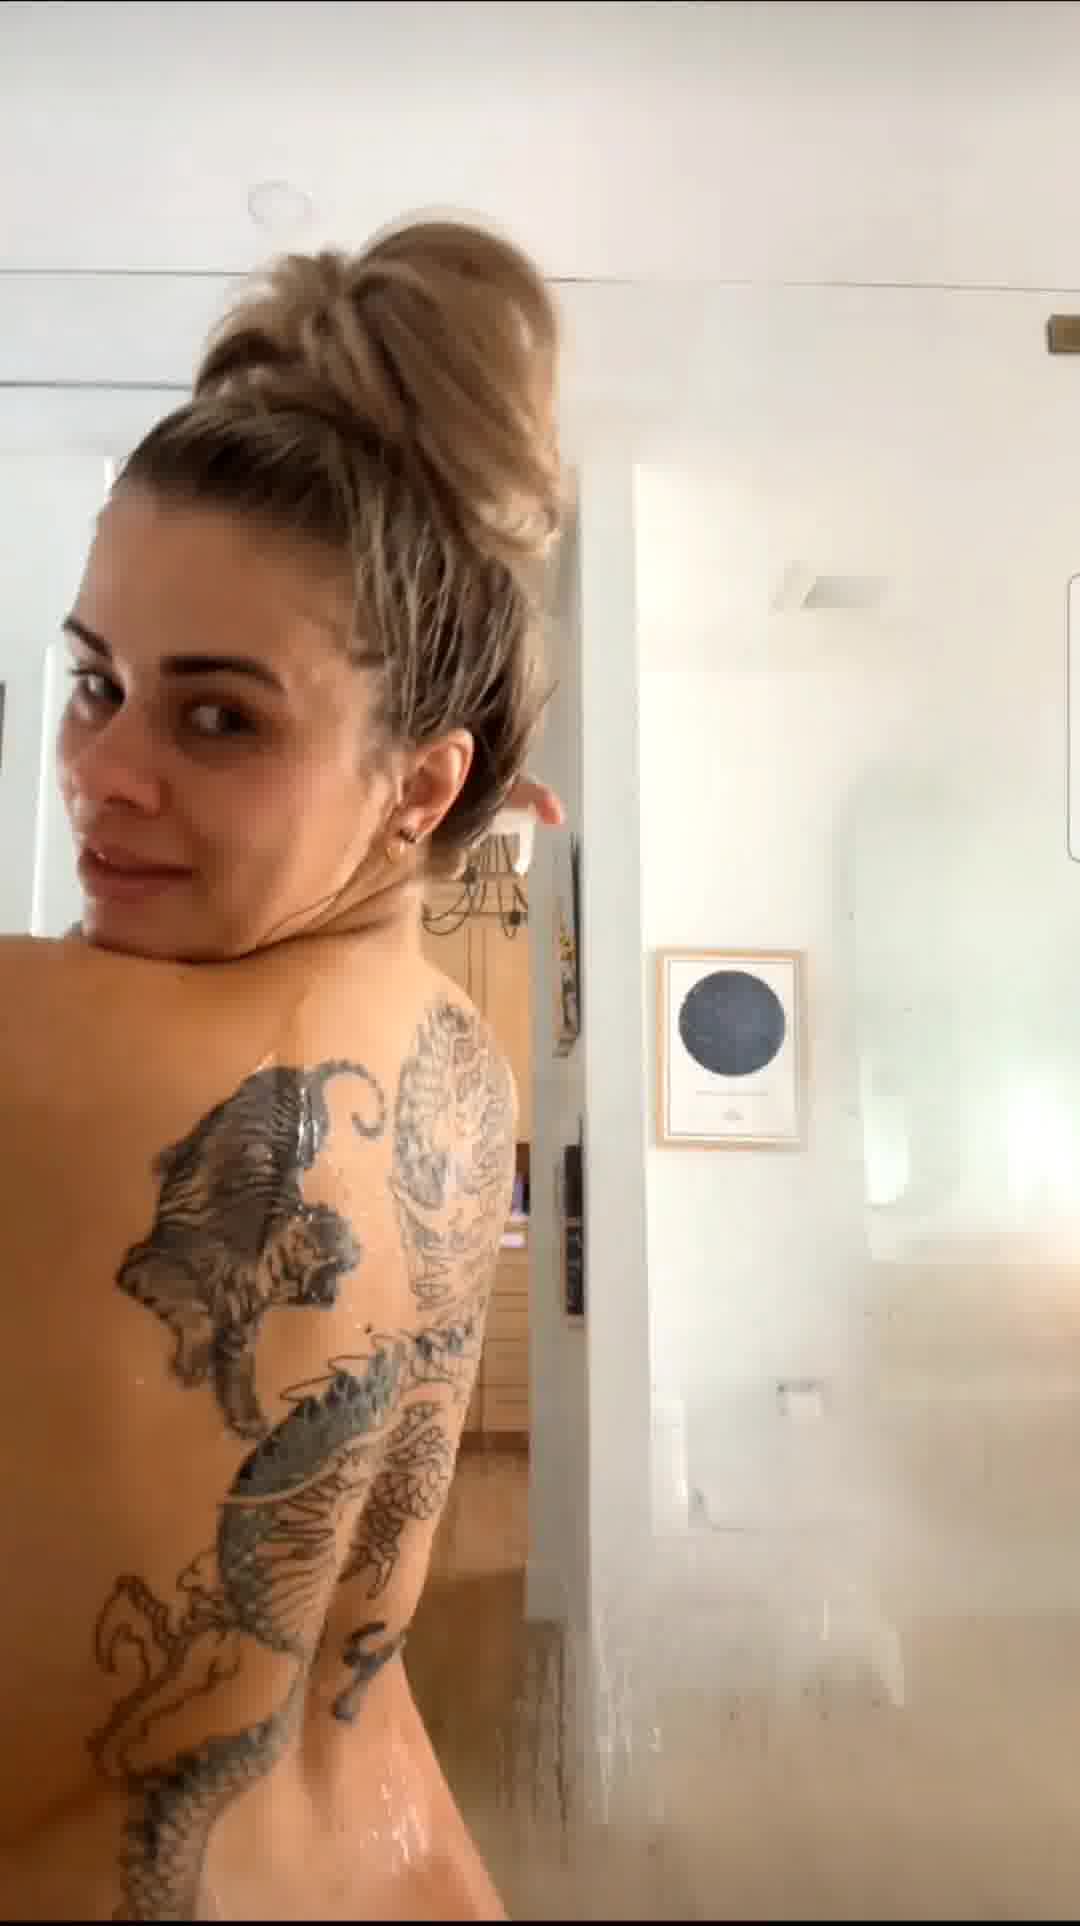 Paige Vanzant Nude Shower in Livestream Video Leaked